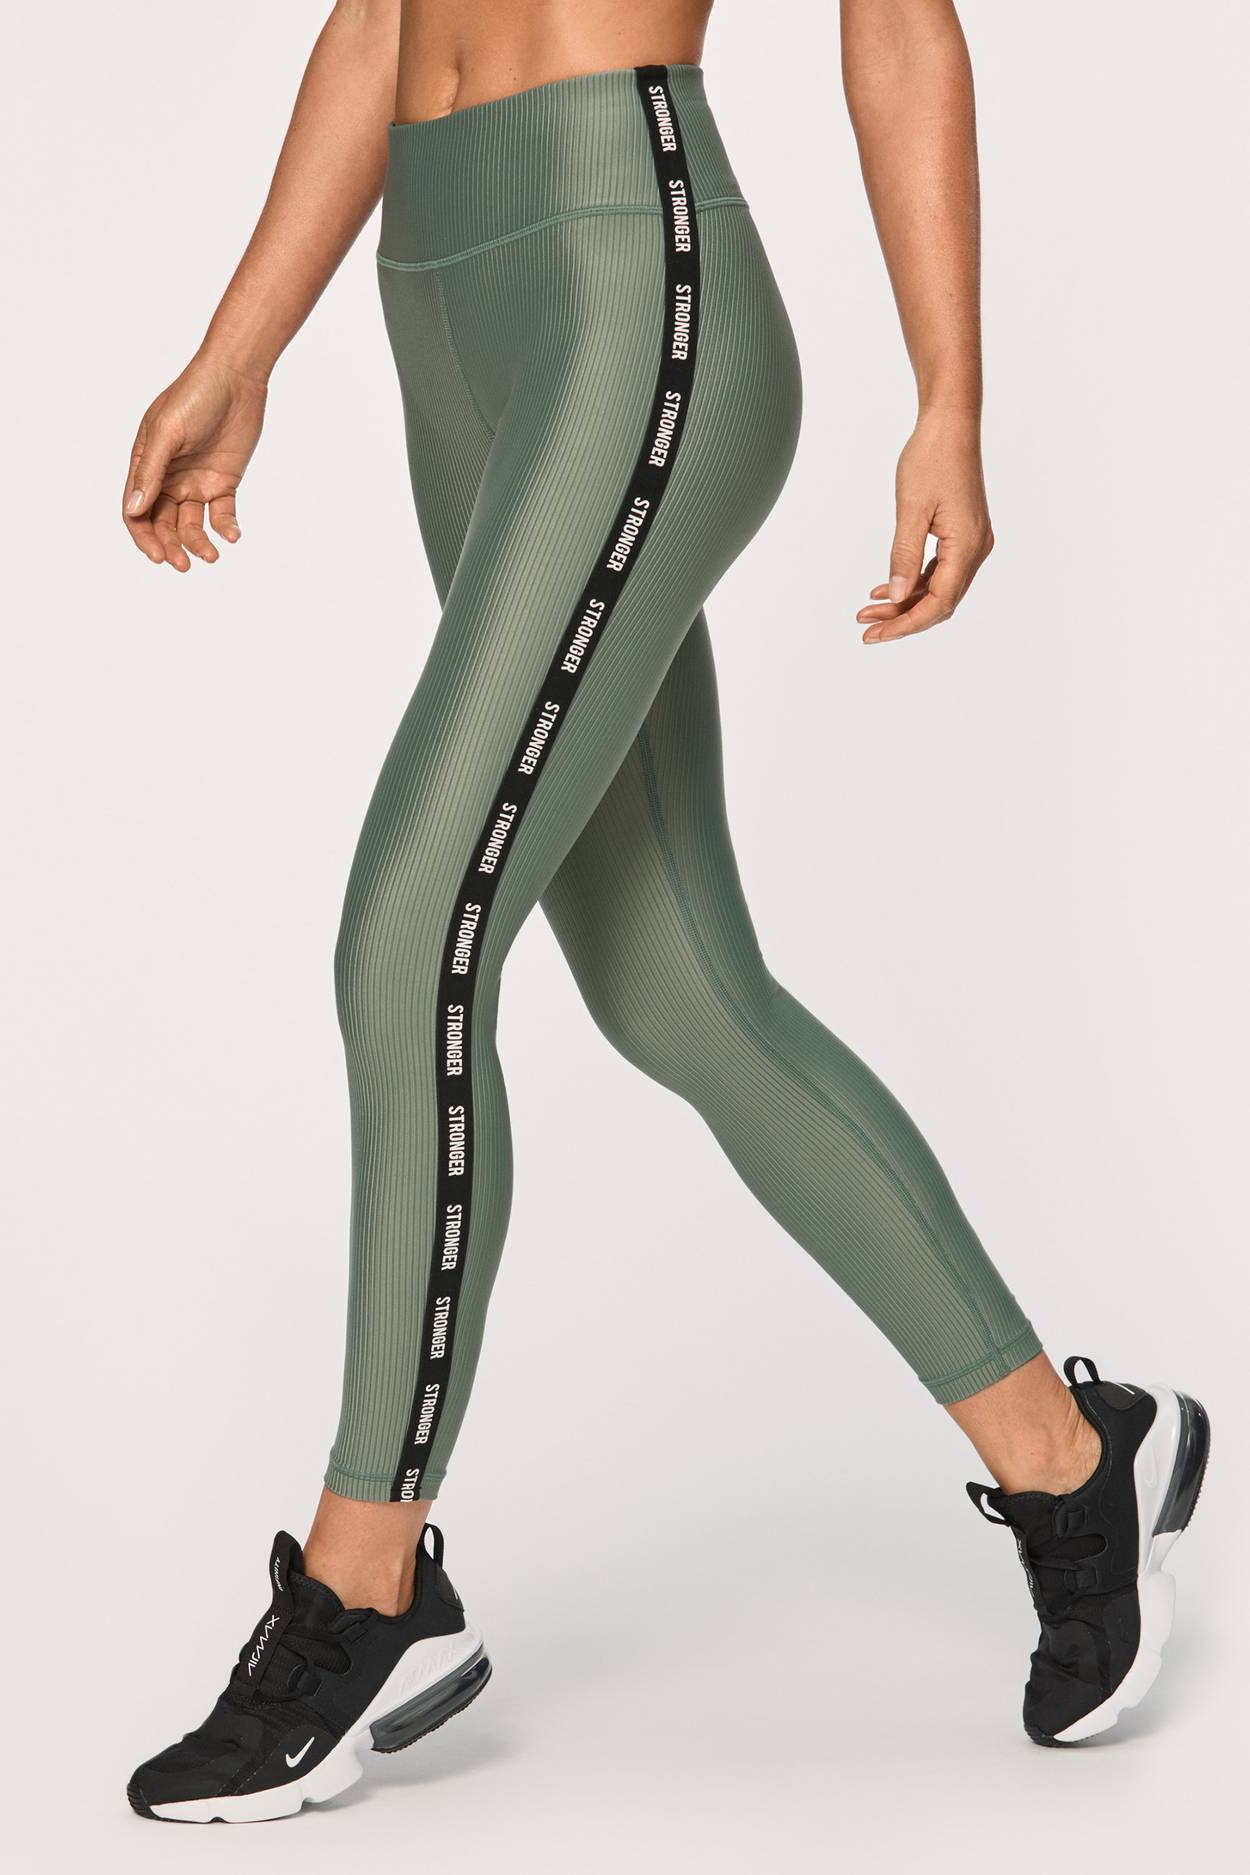 What are you waiting for? Become a true Bounty Huntress today! #huntress # leggings #leggingswithpockets #squatproofleggings